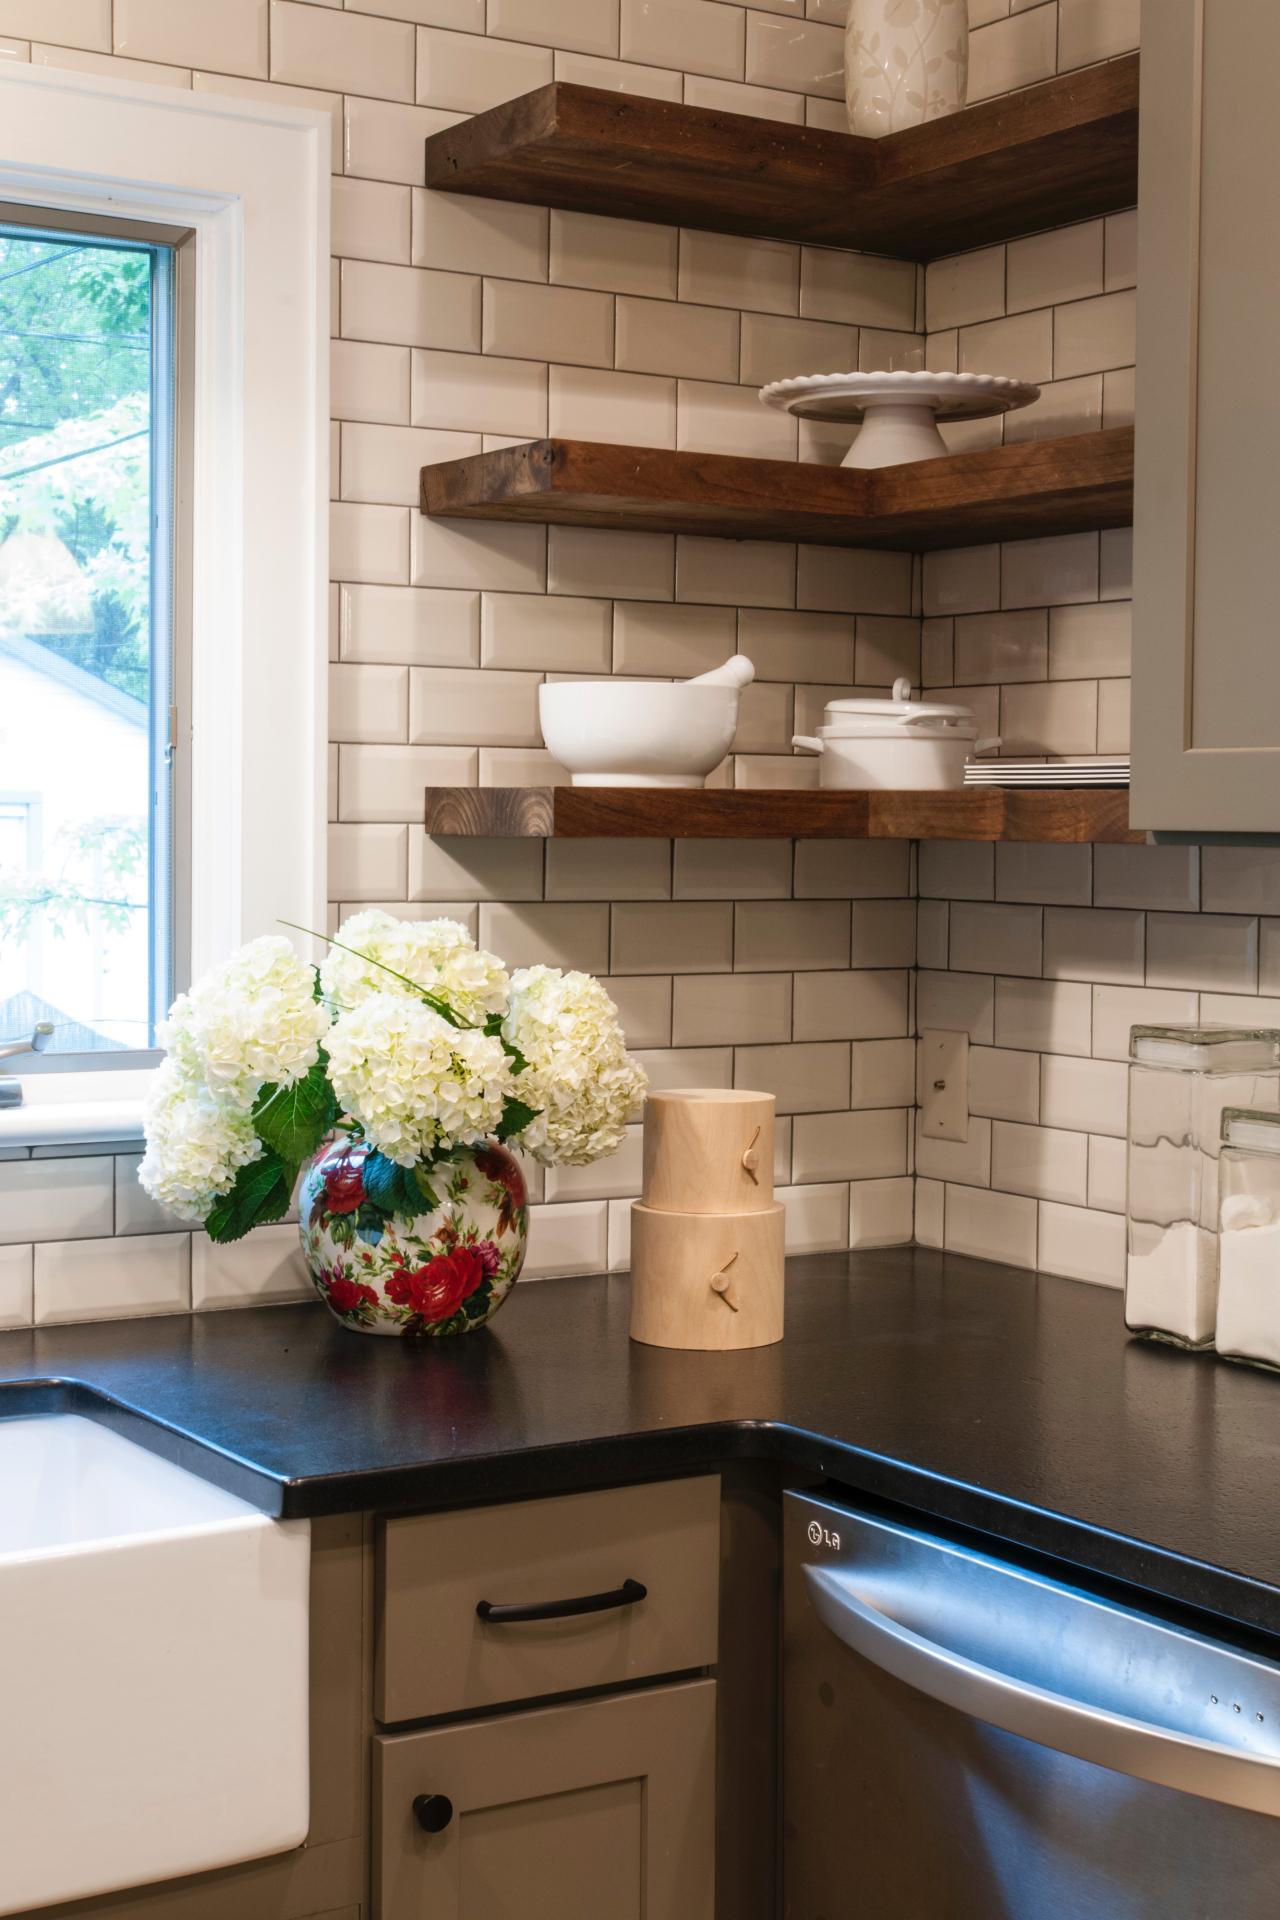 Kitchen shelves: ideas for floating, pull-out, and wall-mounted shelves